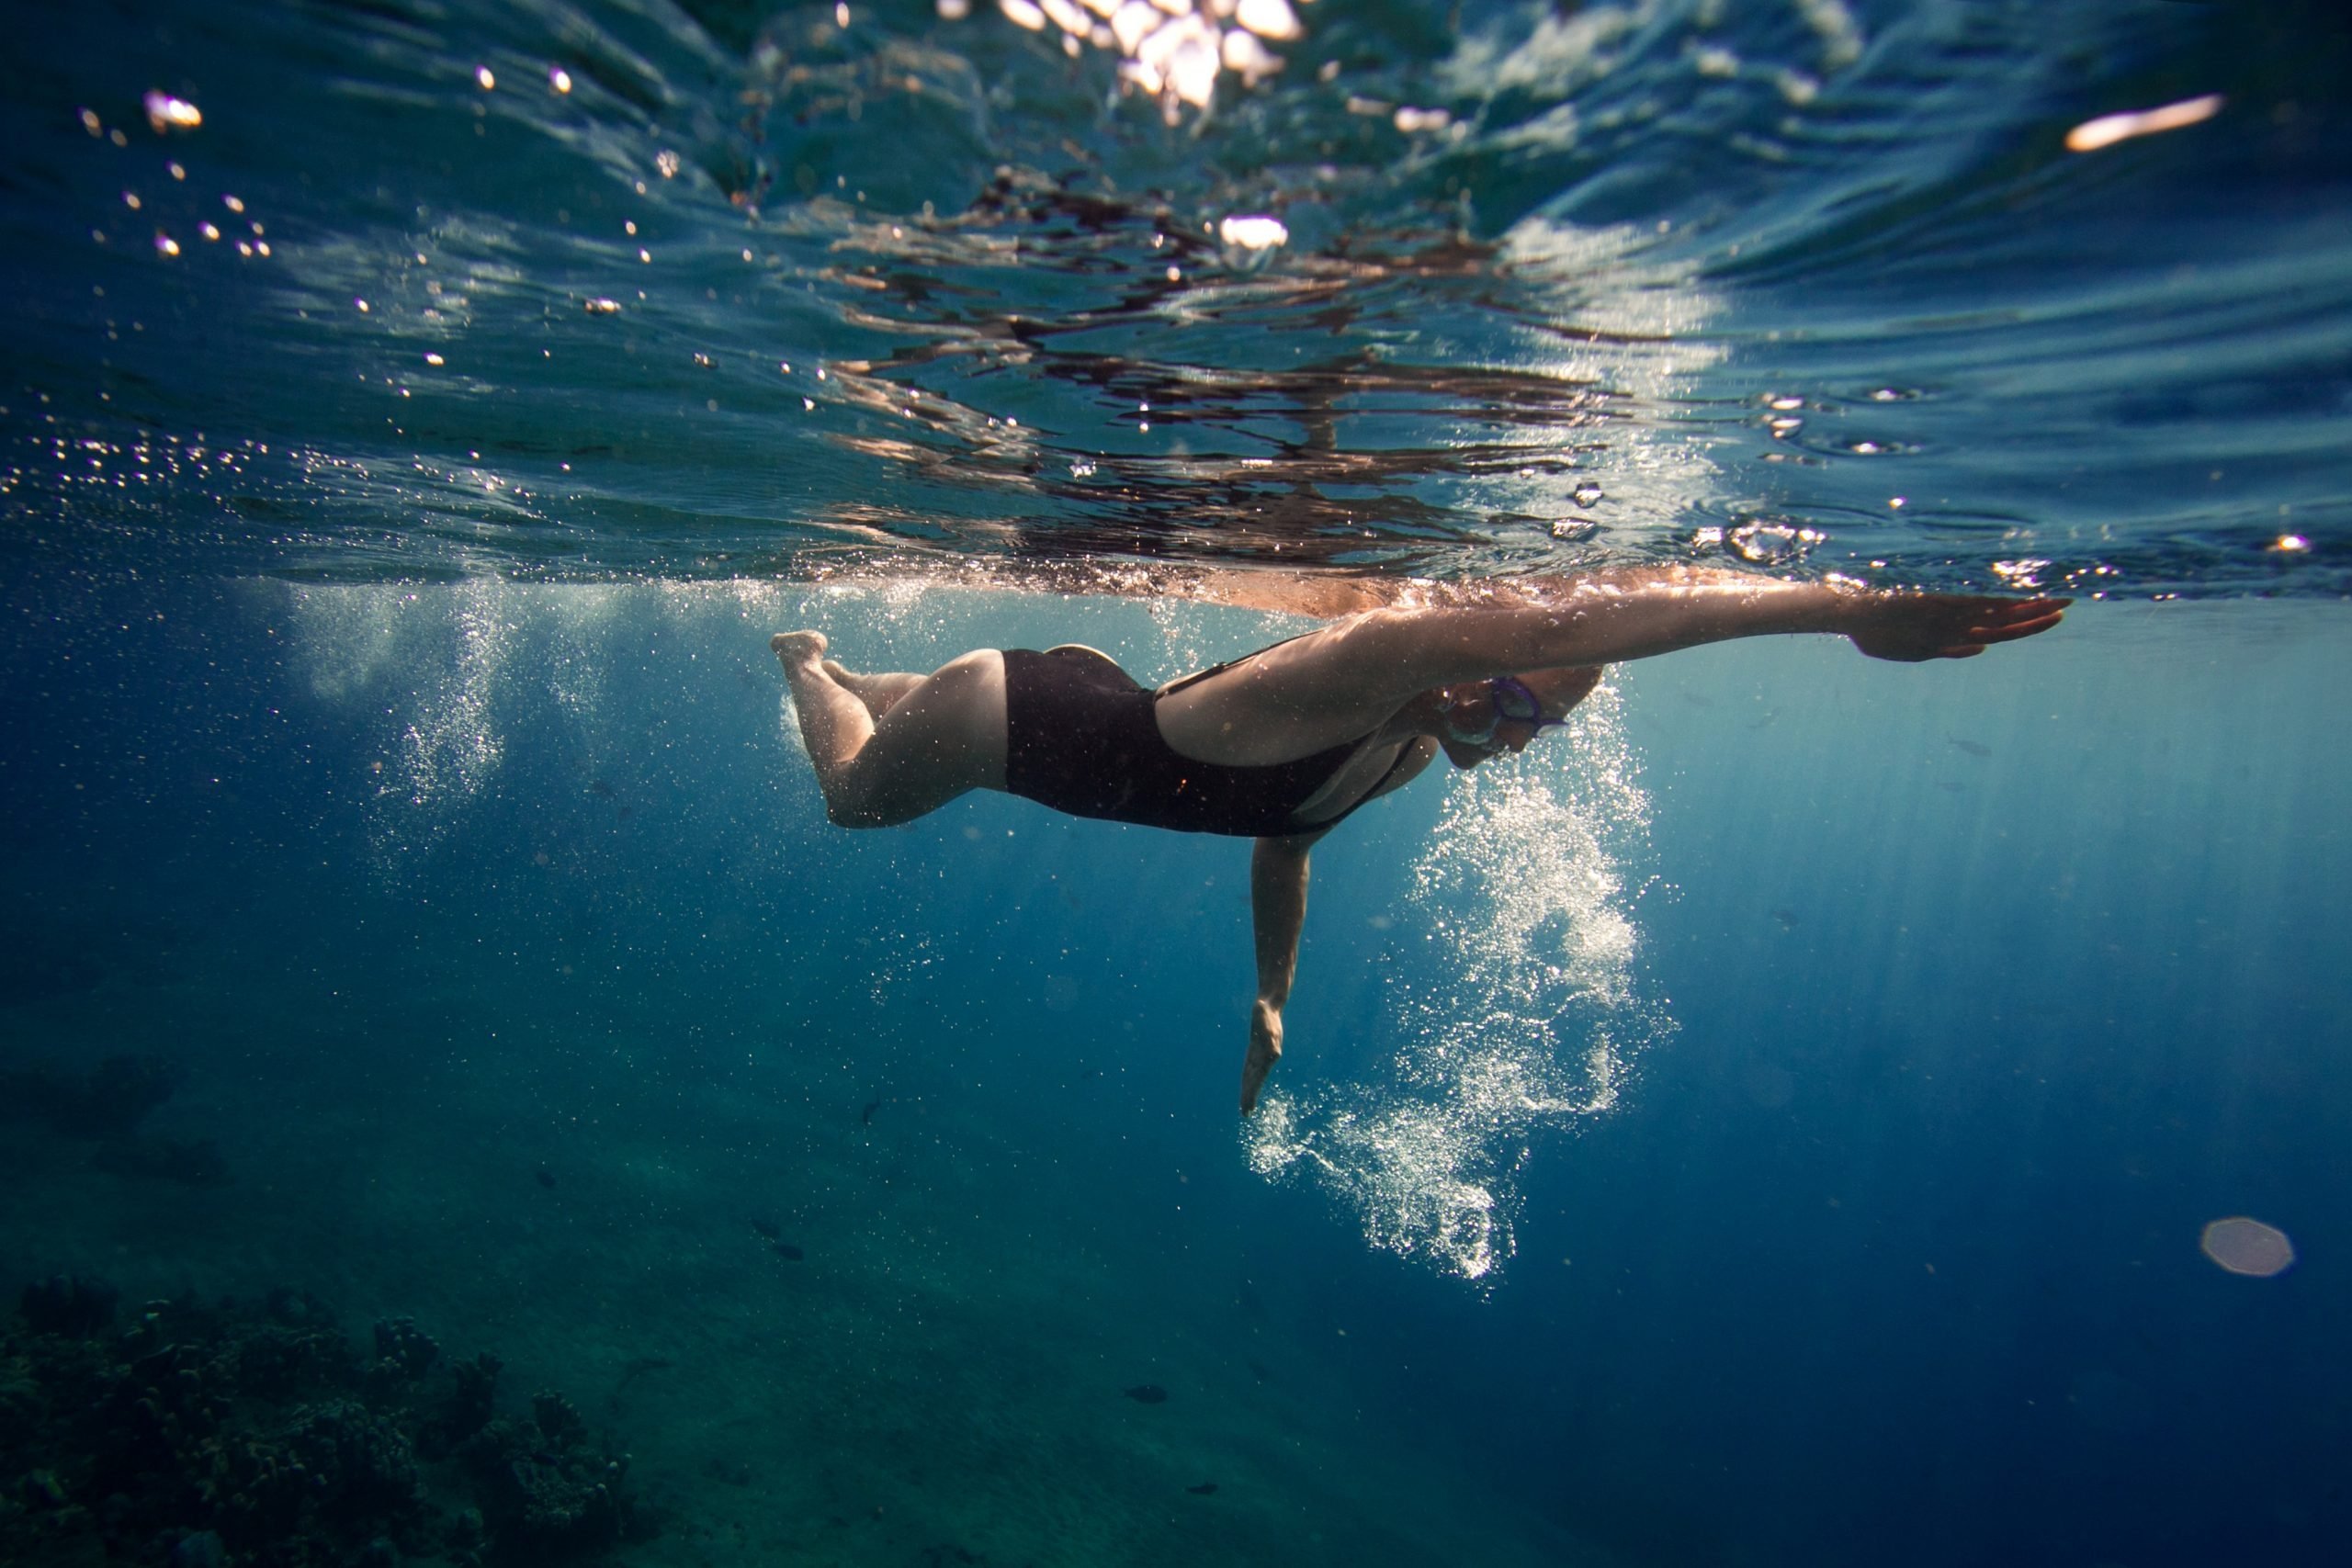 What You Need to Know Before Swimming in the Ocean